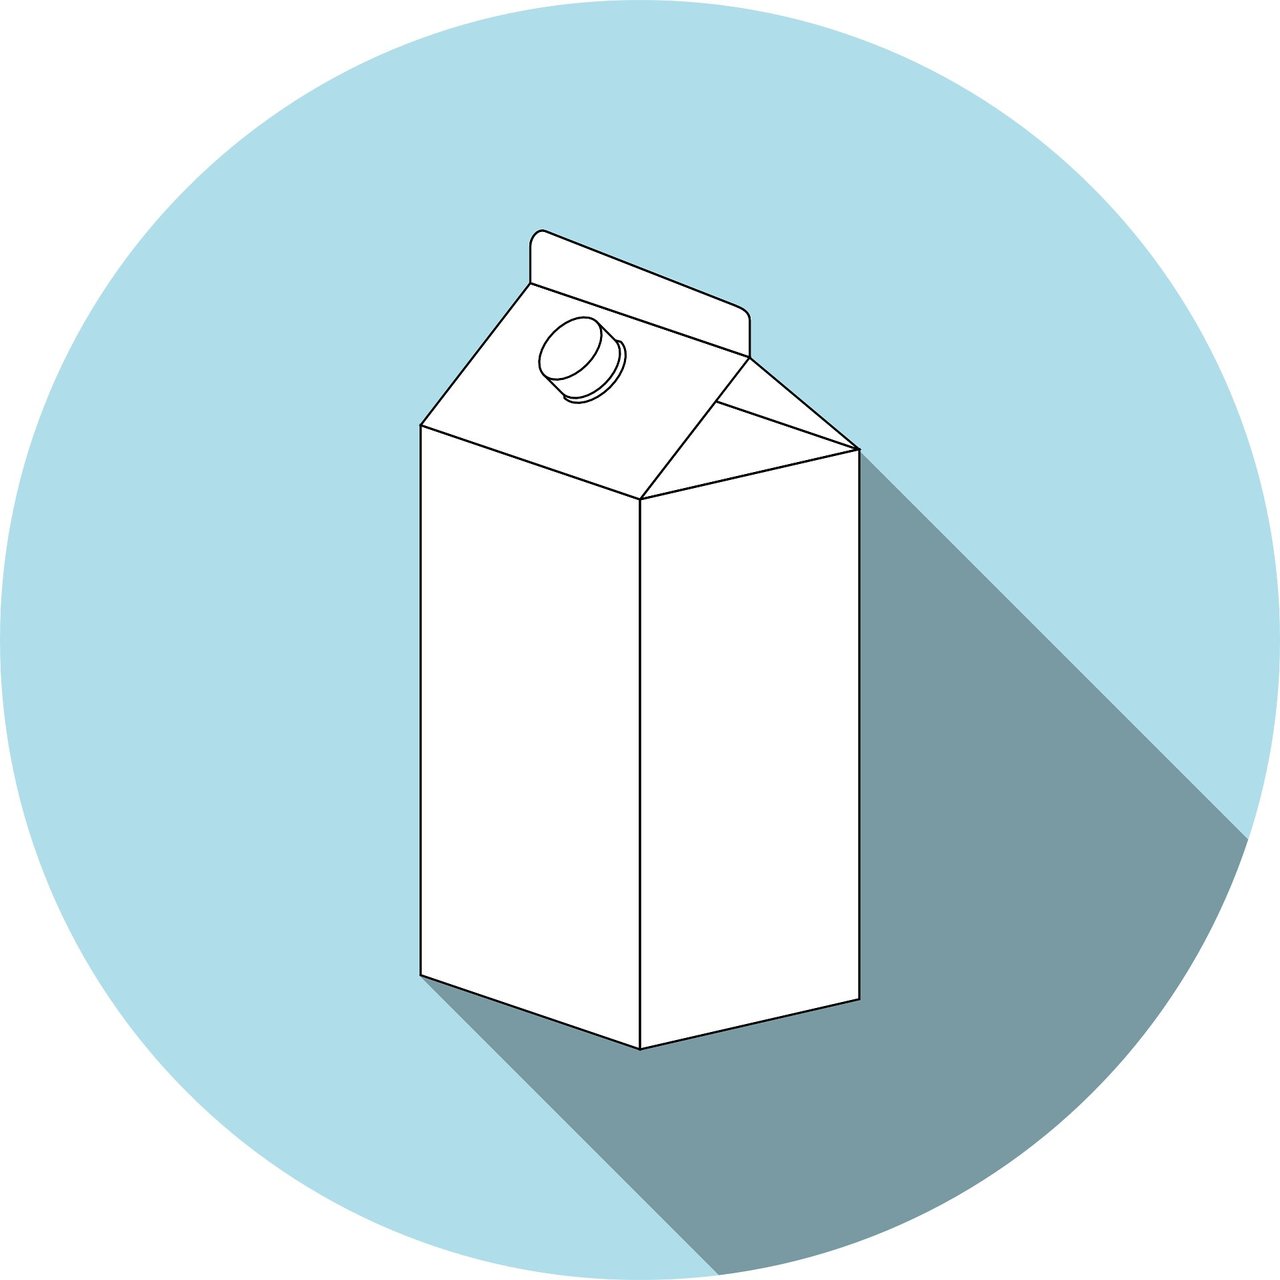 Milk Carton Sell By Dates May Become More Precise